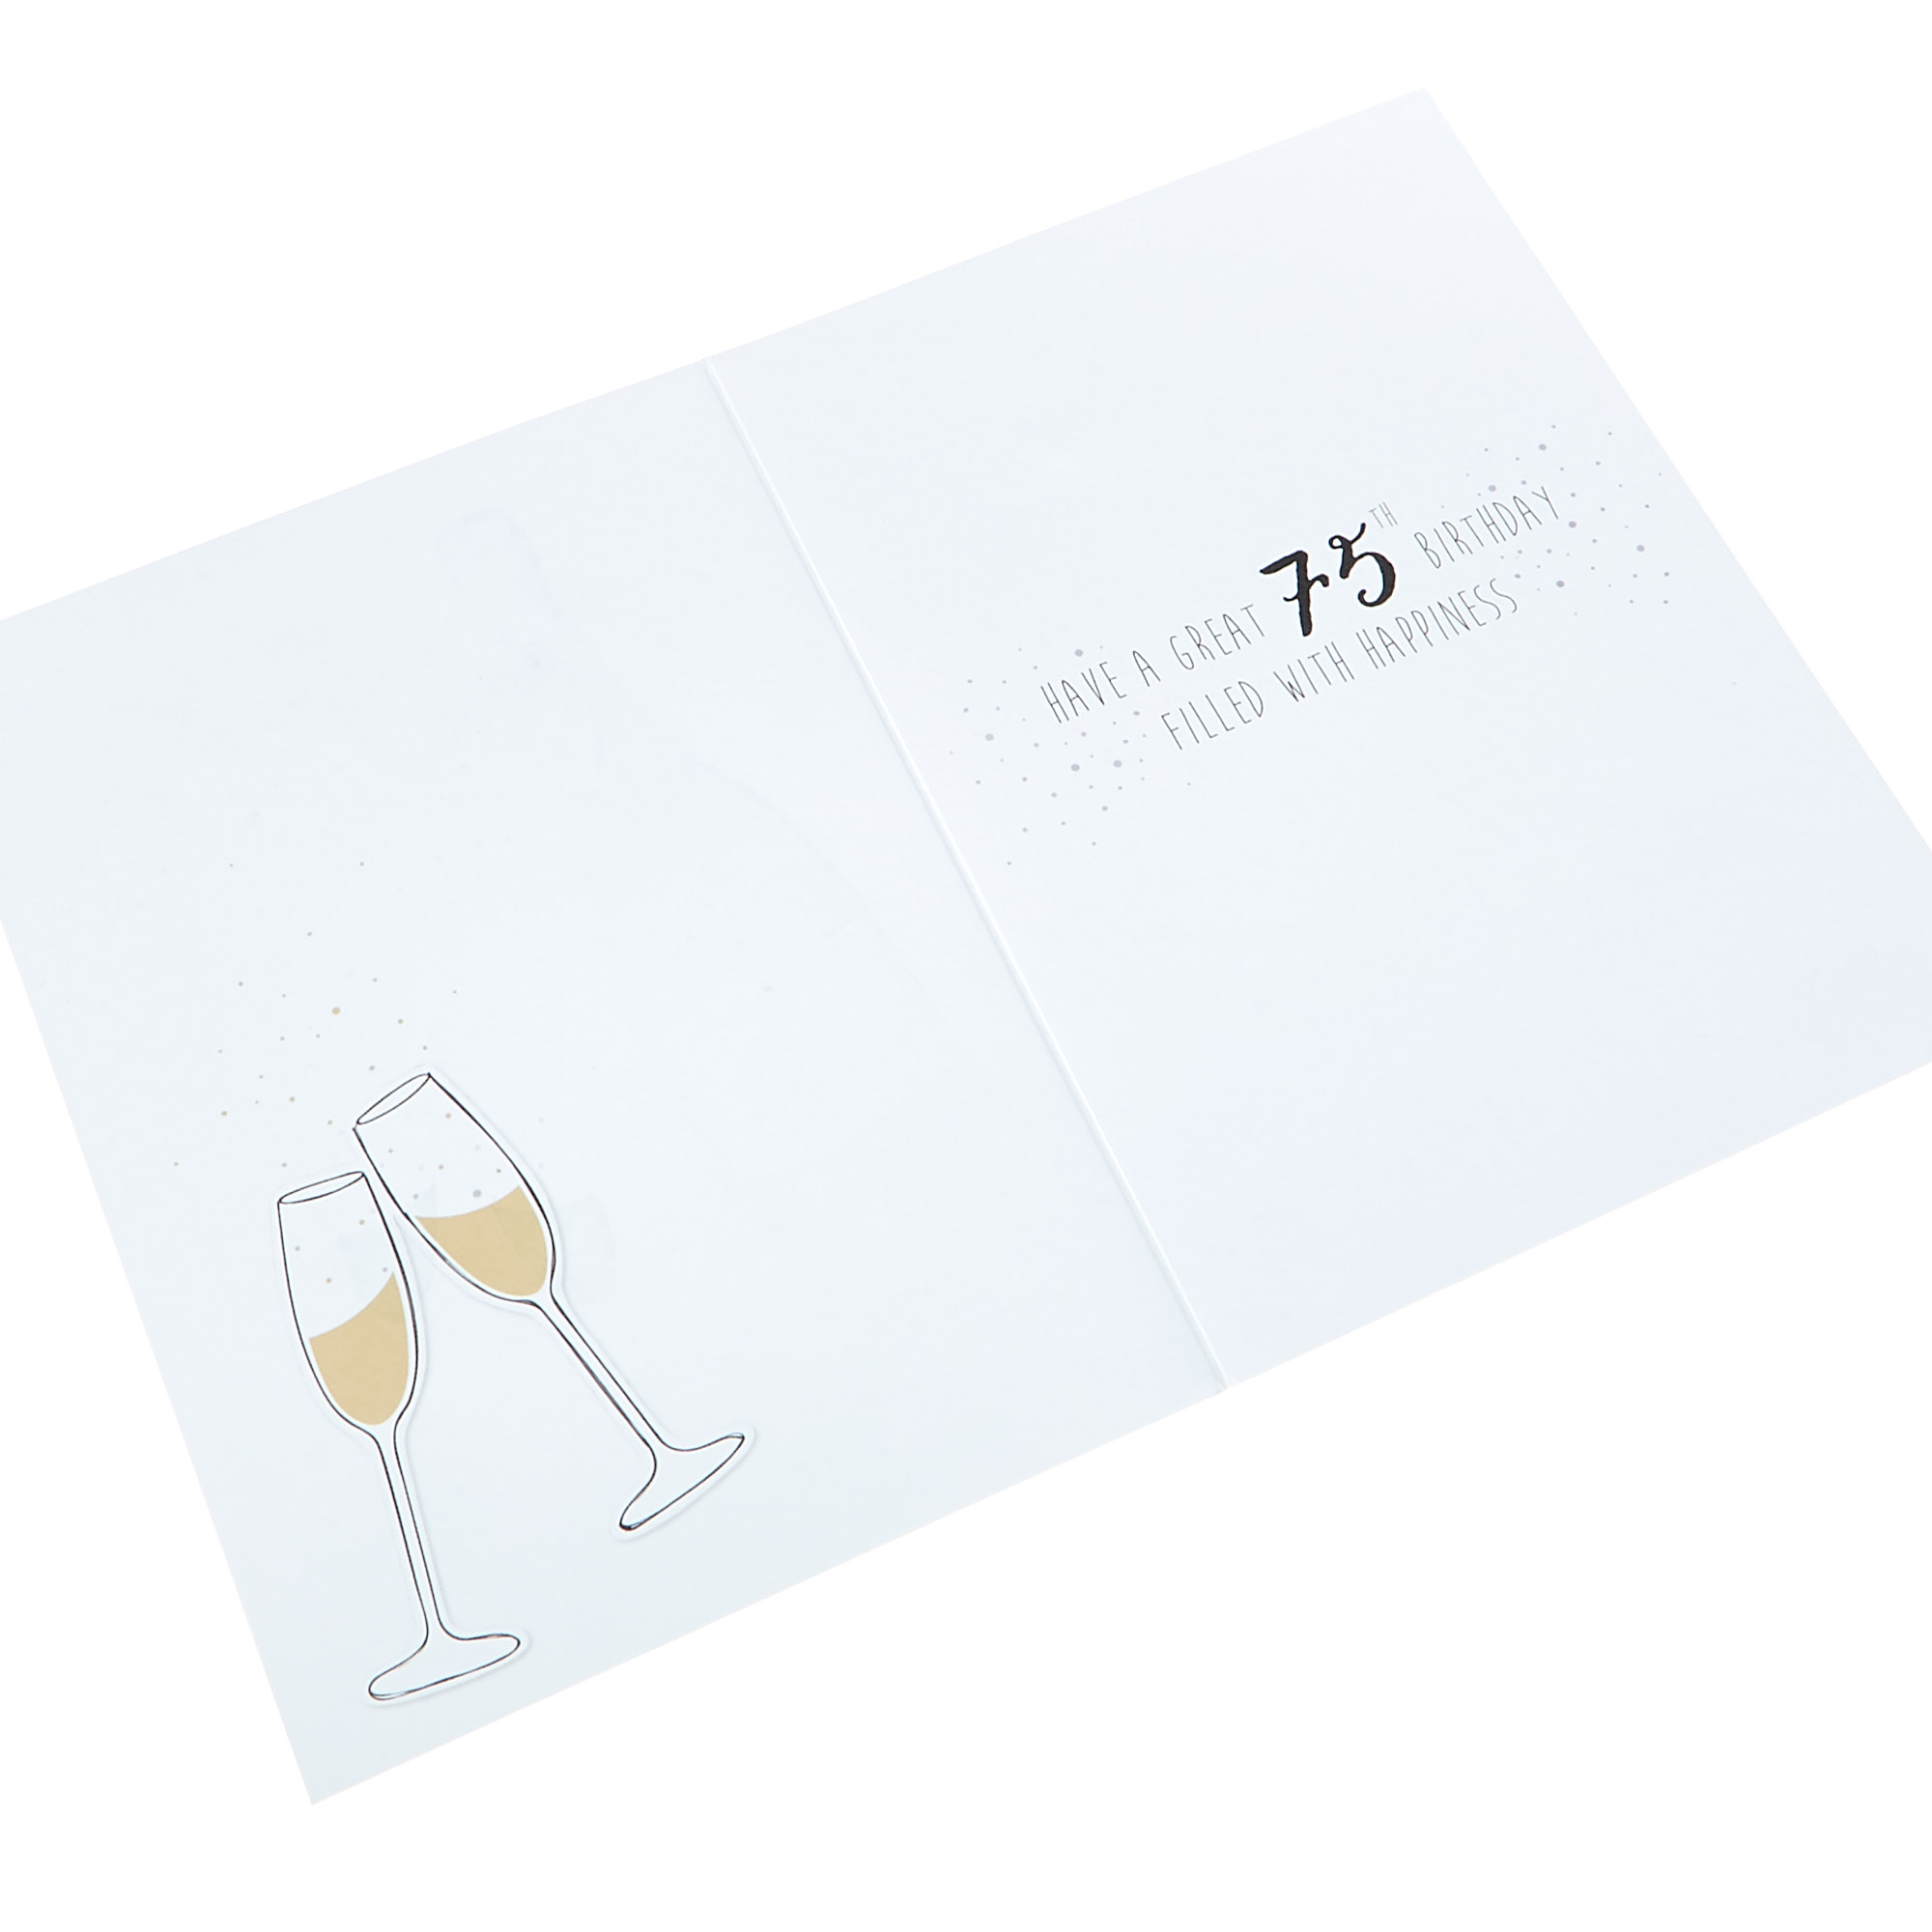 75th Birthday Card - Better Than Ever